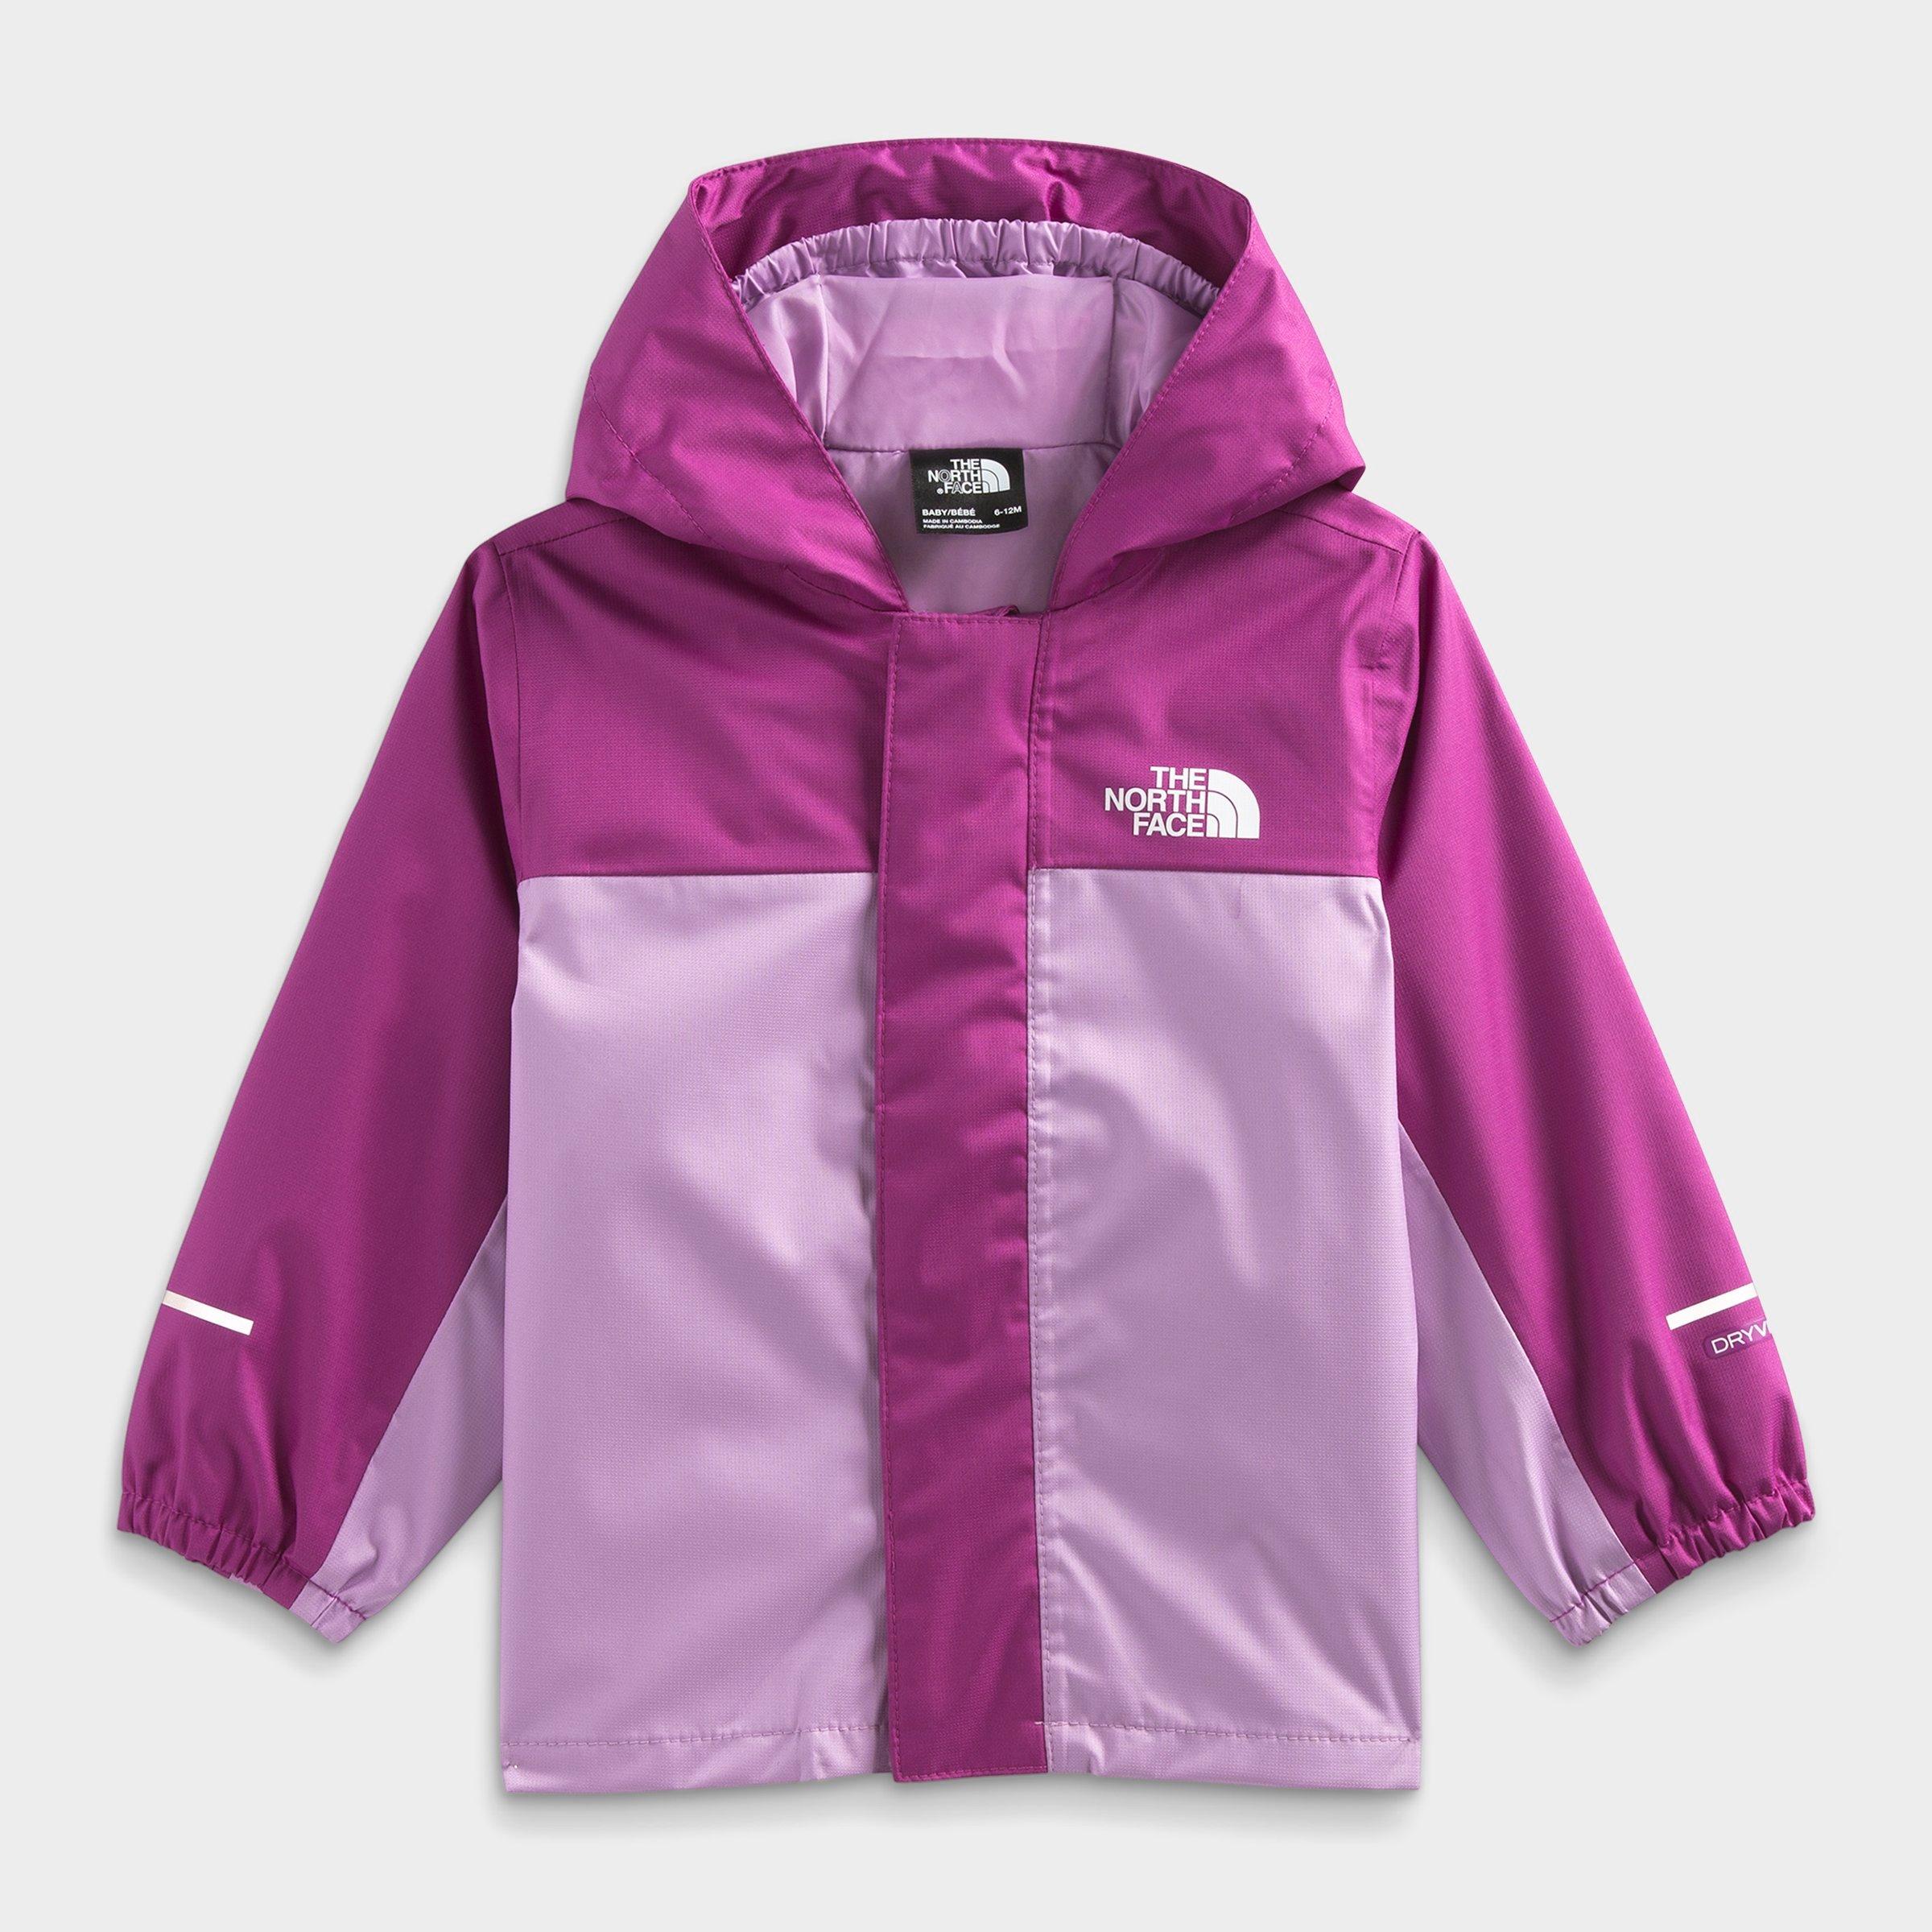 The North Face Babies'  Inc Kids' Toddler And Little Kids' Antora Rain Jacket In Black Grid Allover Print